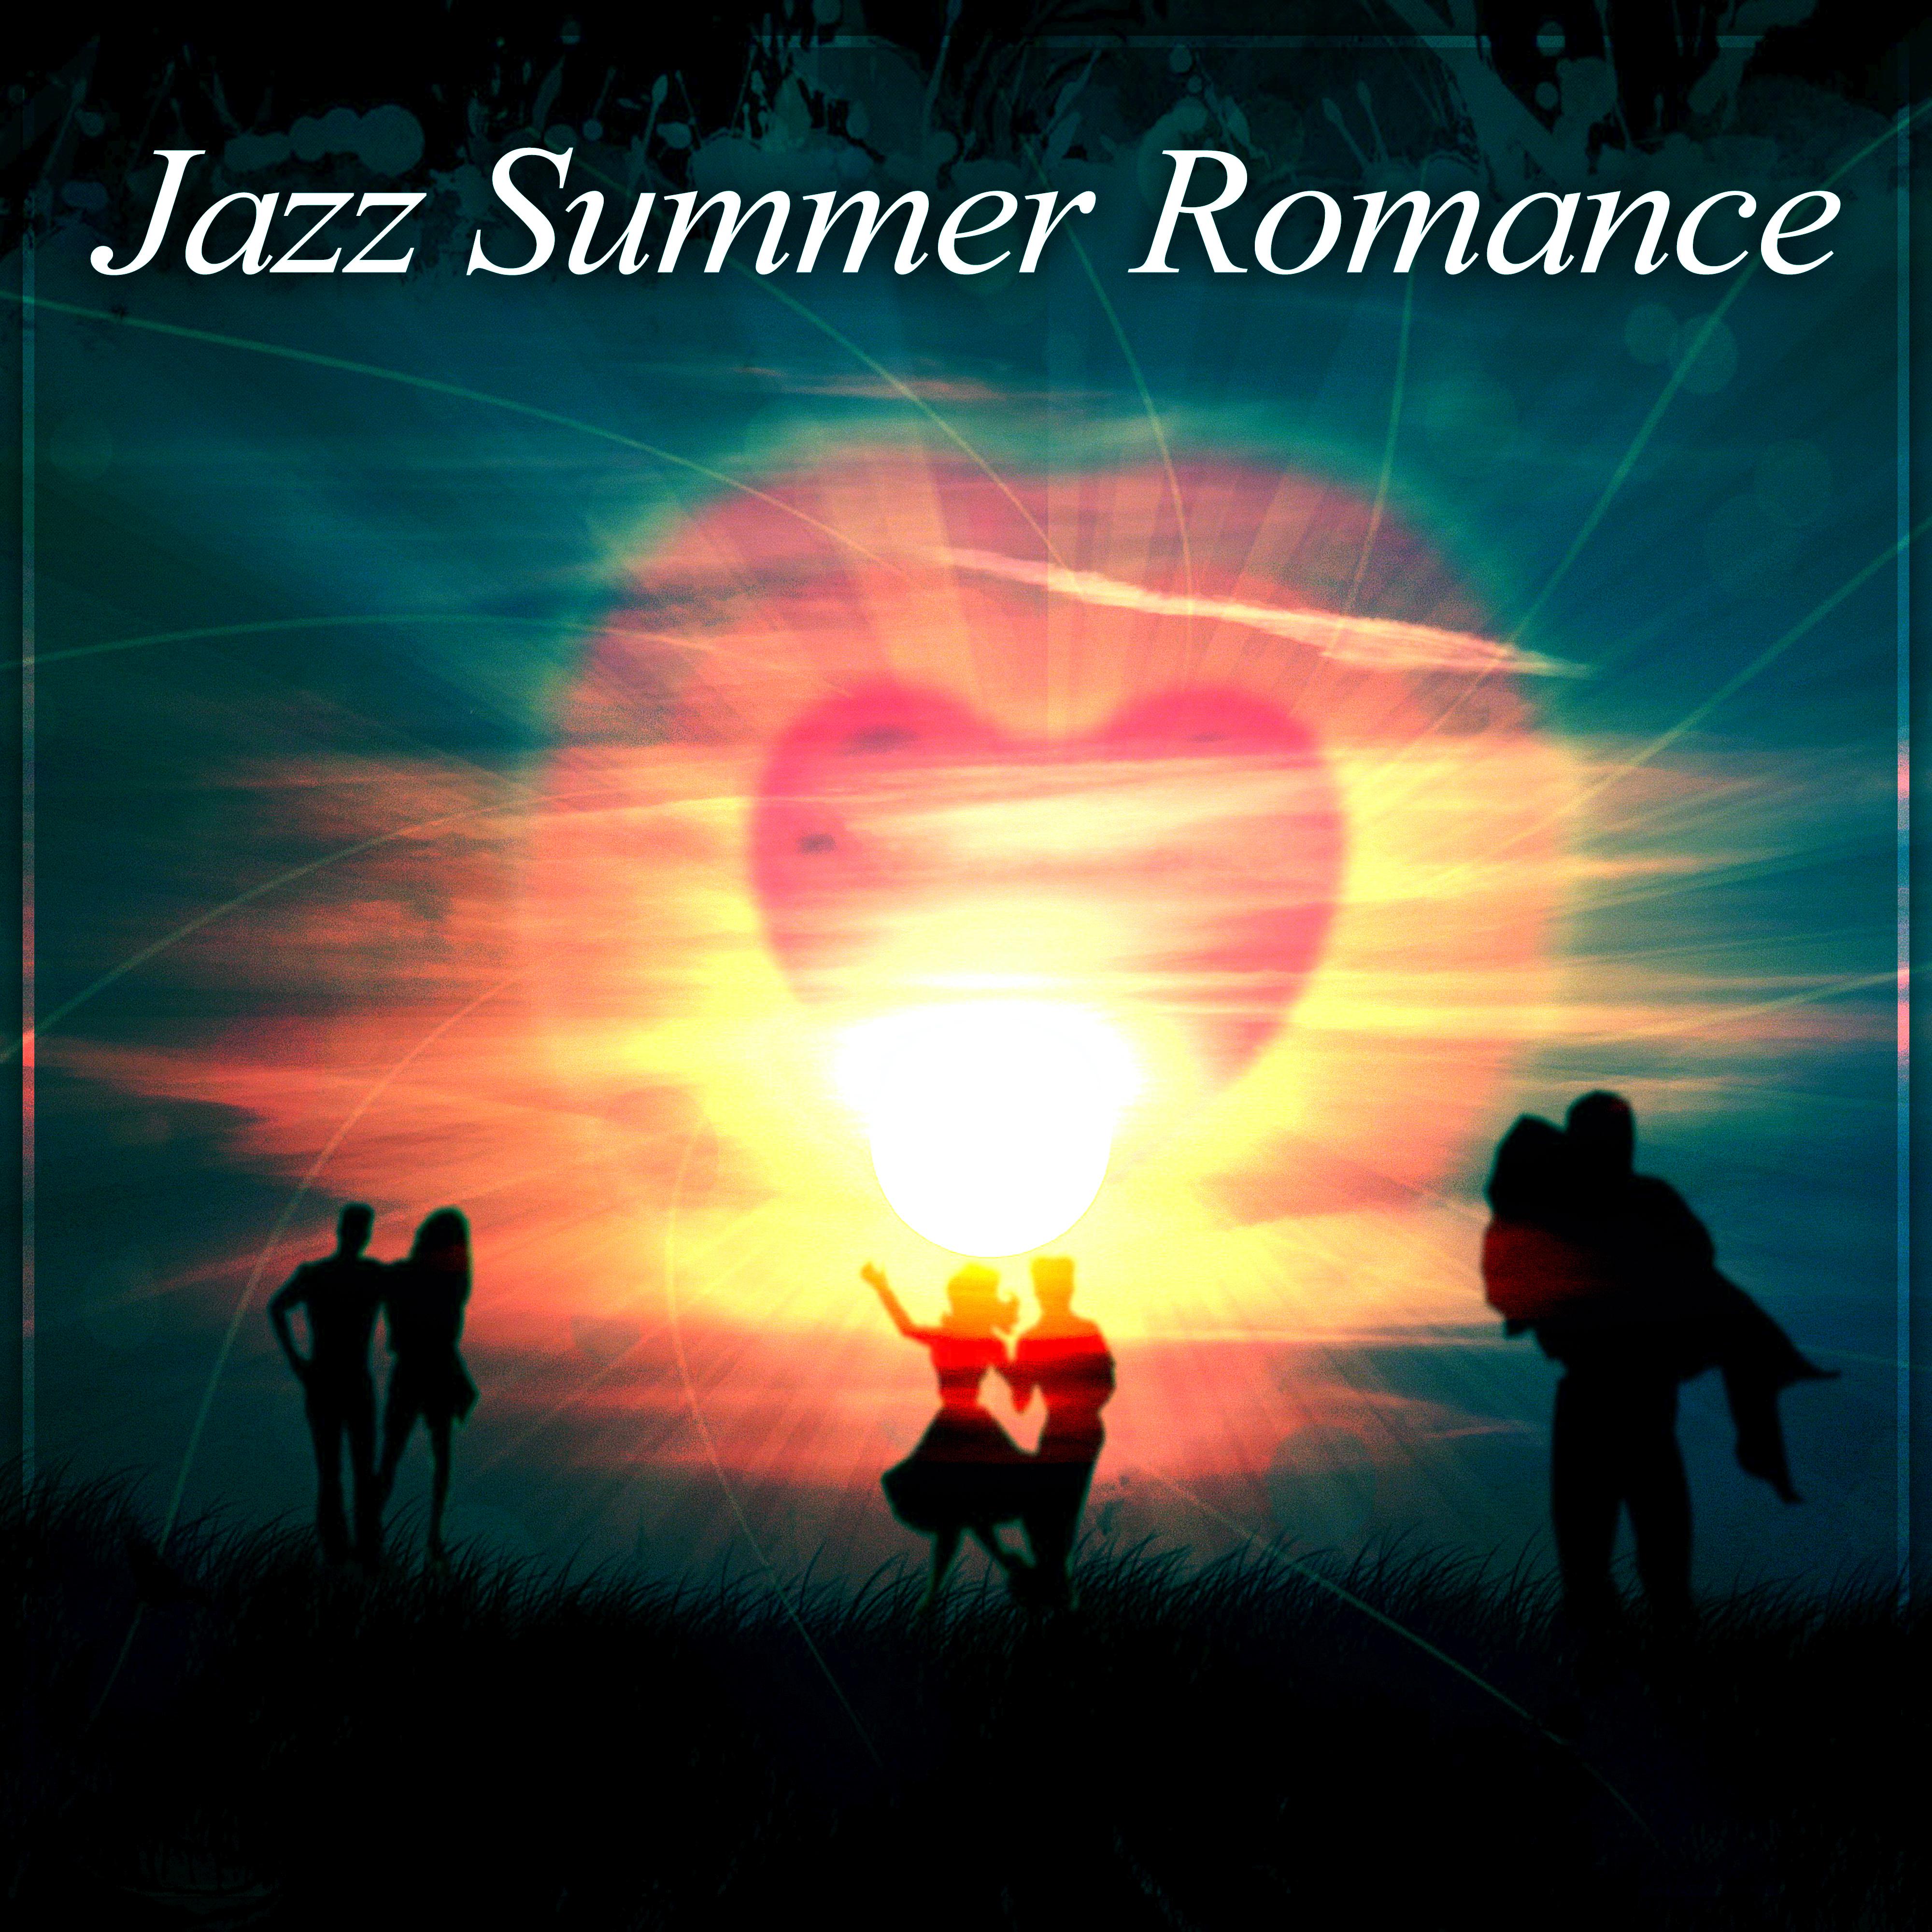 Jazz Summer Romance  Romantic Saxophone Music for Summer Evening, Erotic Music for Intimate Moments